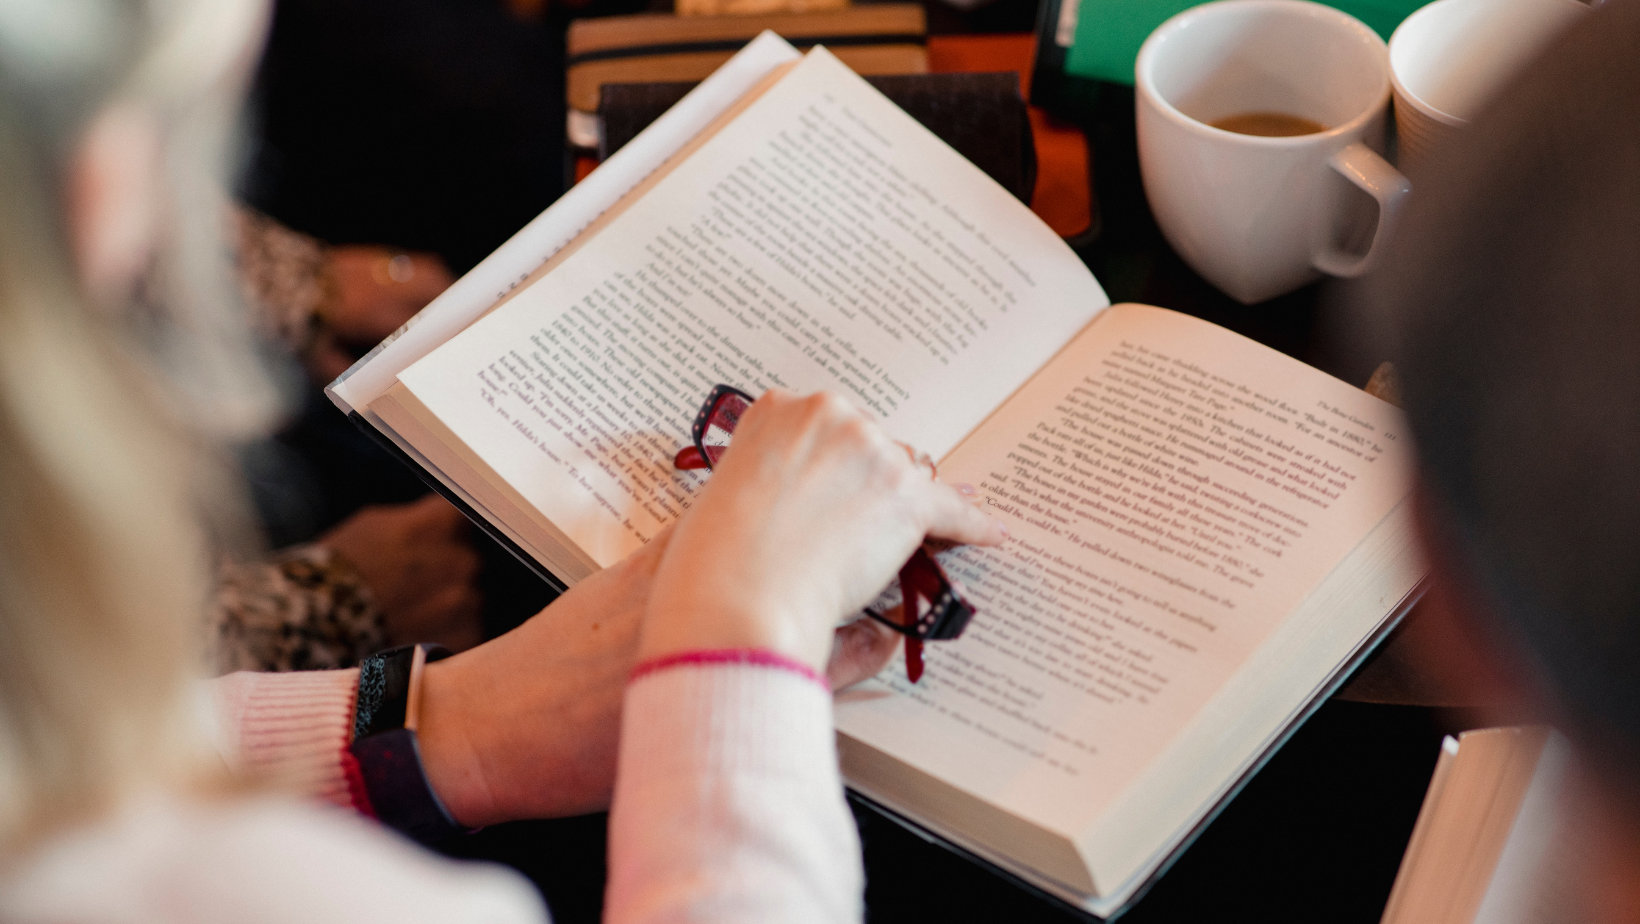 woman reads open books with friends while drinking coffee and holding reading glasses 